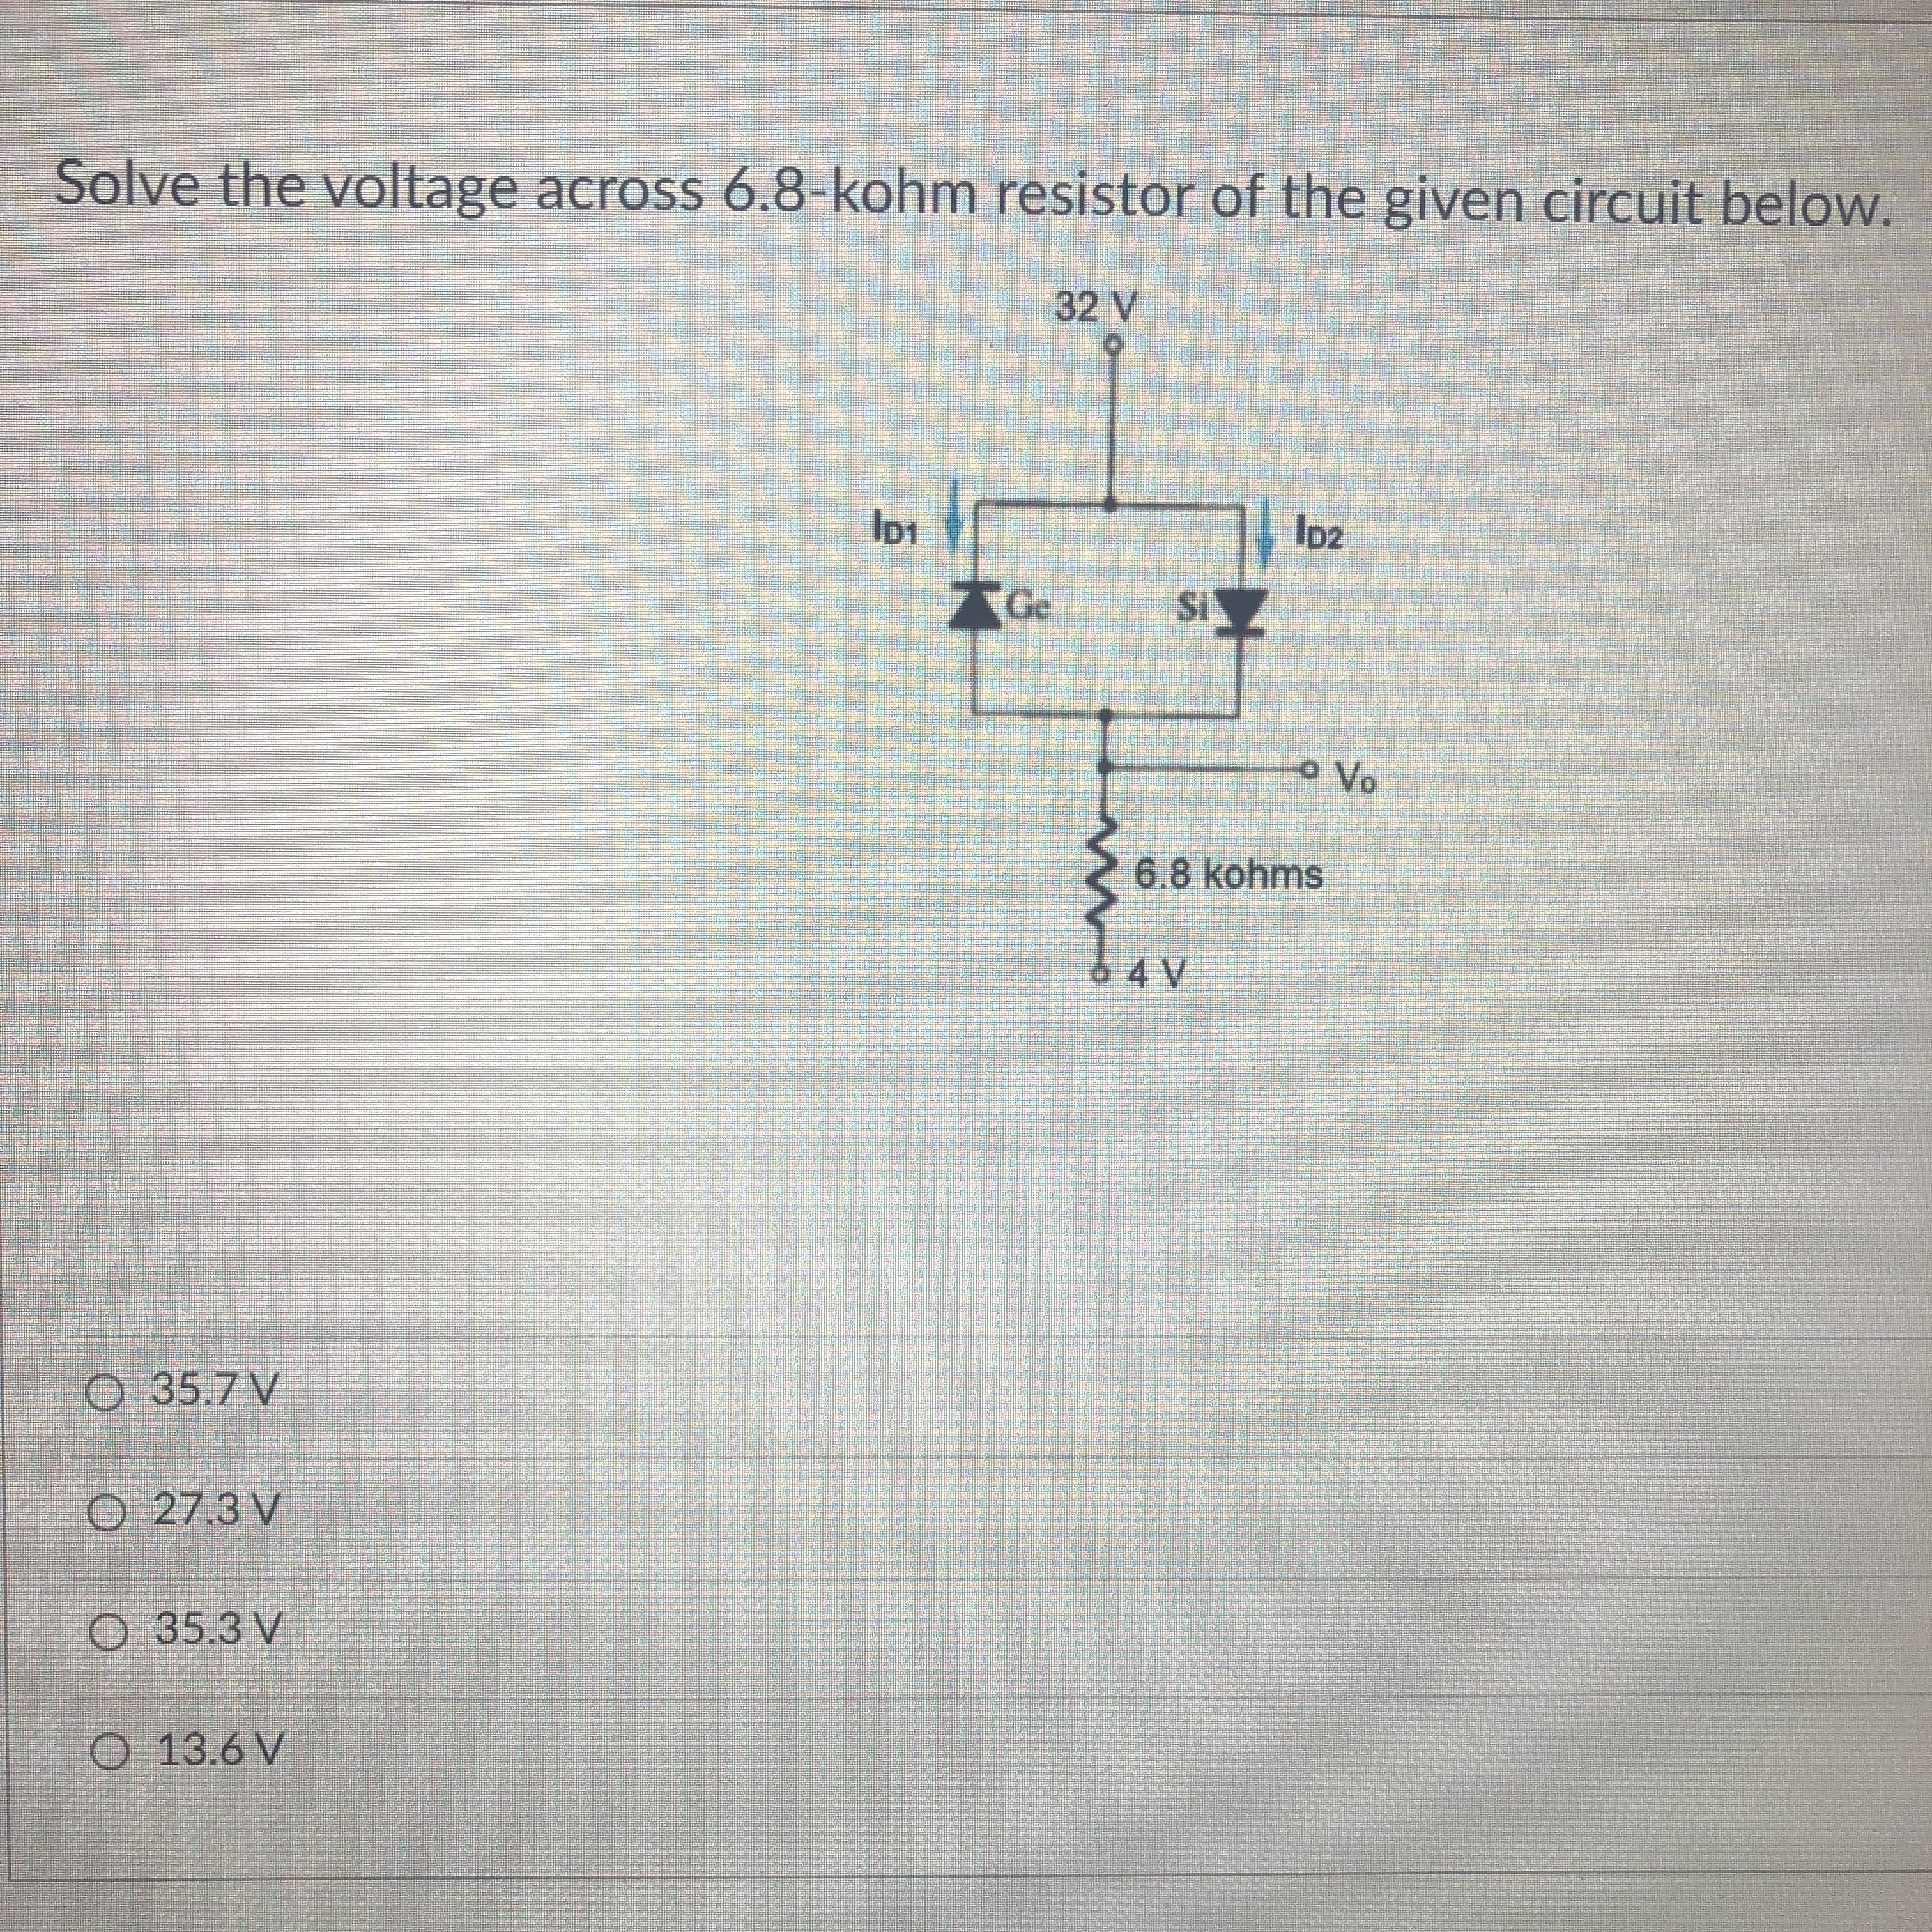 Solve the voltage across 6.8-kohm resistor of the given circuit below.
32 V
AGe
6.8 kohms
6 4 V
O 35.7 V
O 27.3 V
O 35.3 V
O 13.6 V
